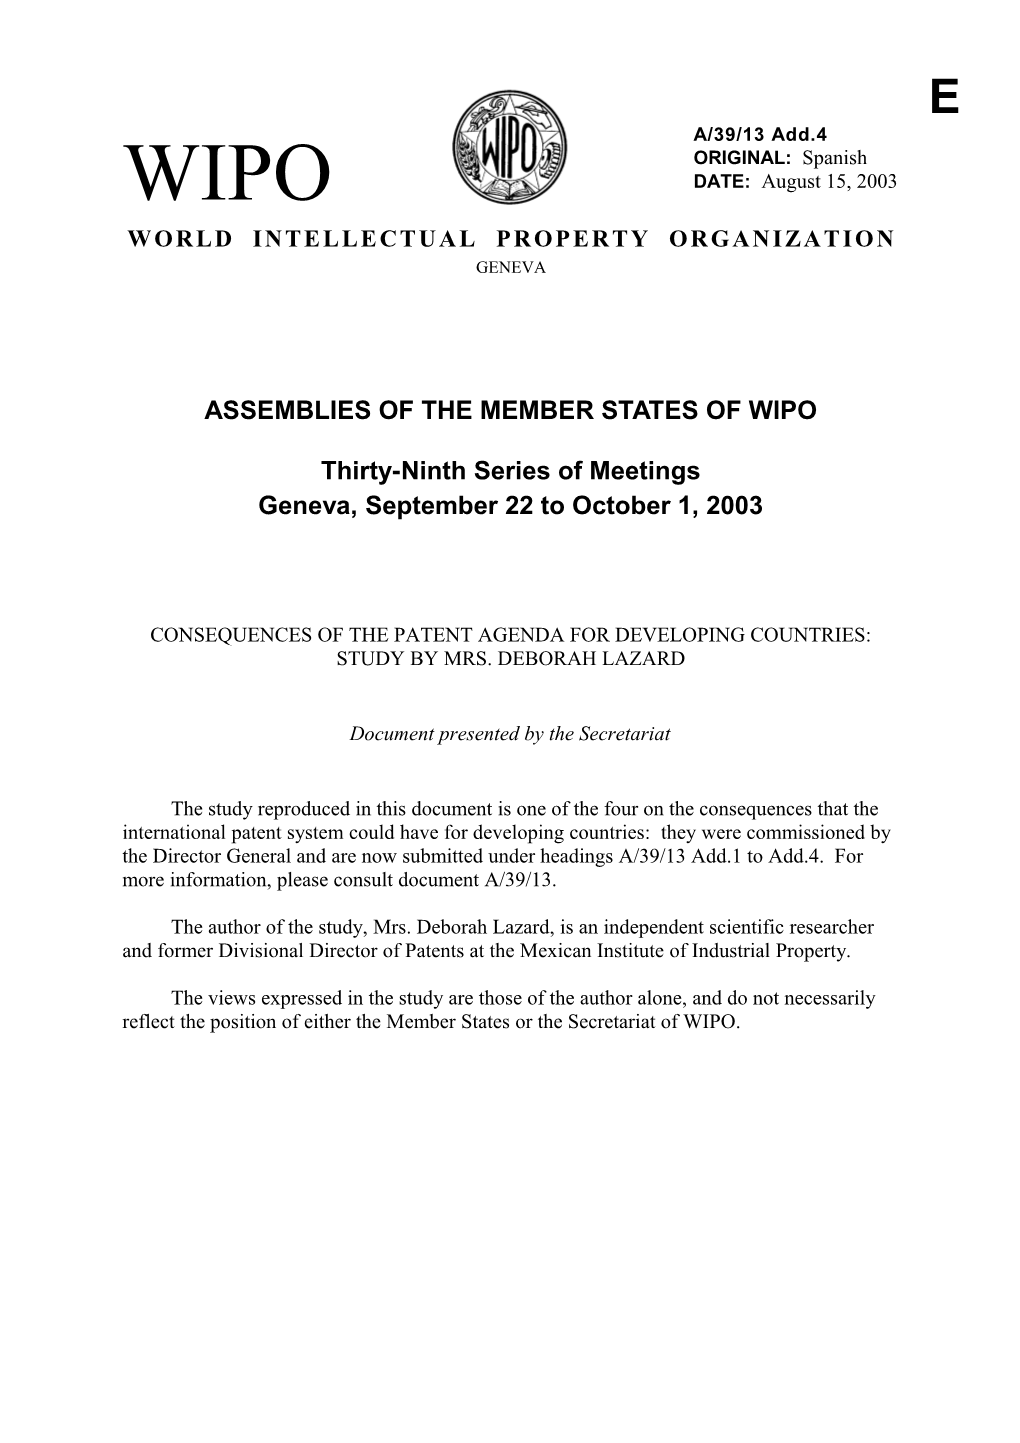 A/39/13 ADD.4: Consequences of the Patent Agenda for Developing Countries: Study by Mrs